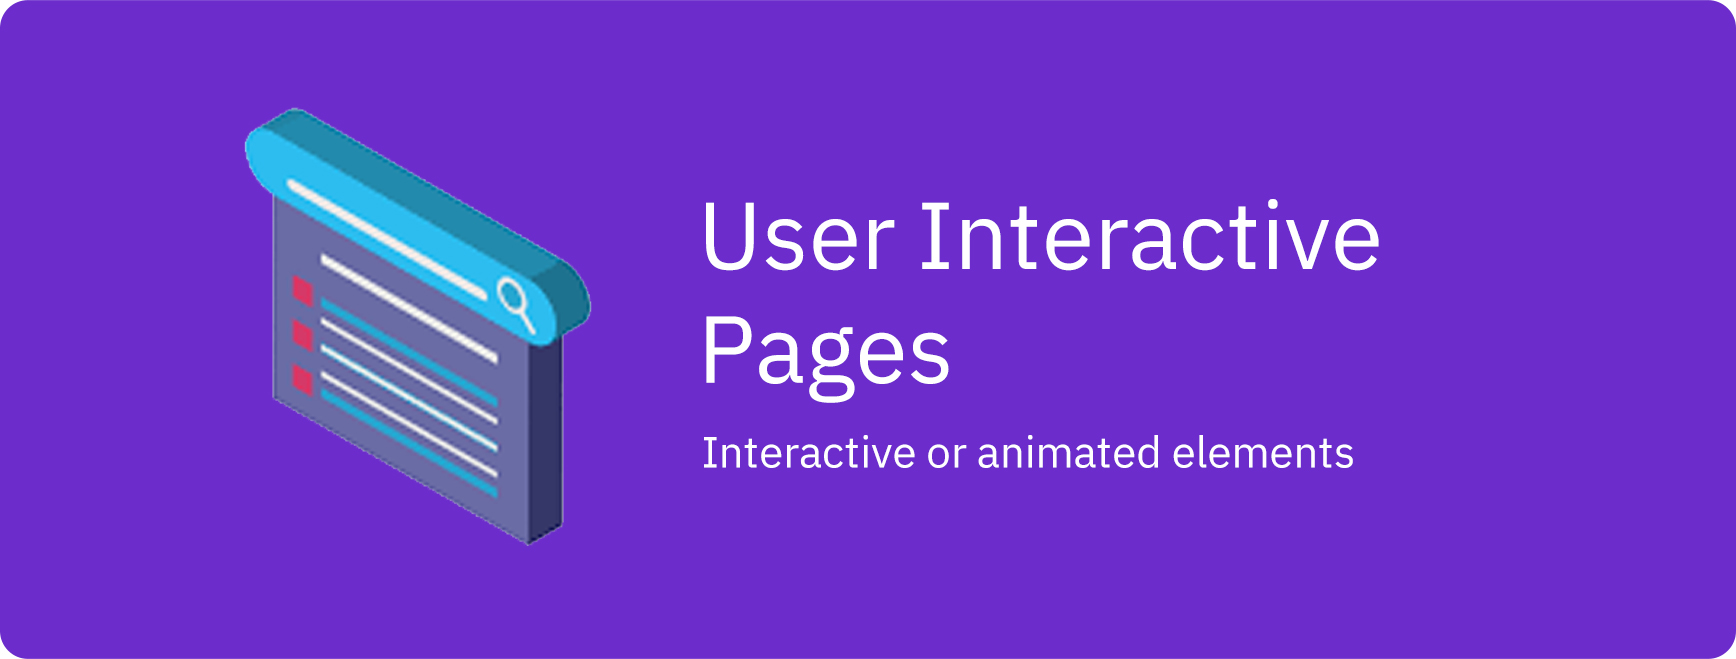 User interactive pages